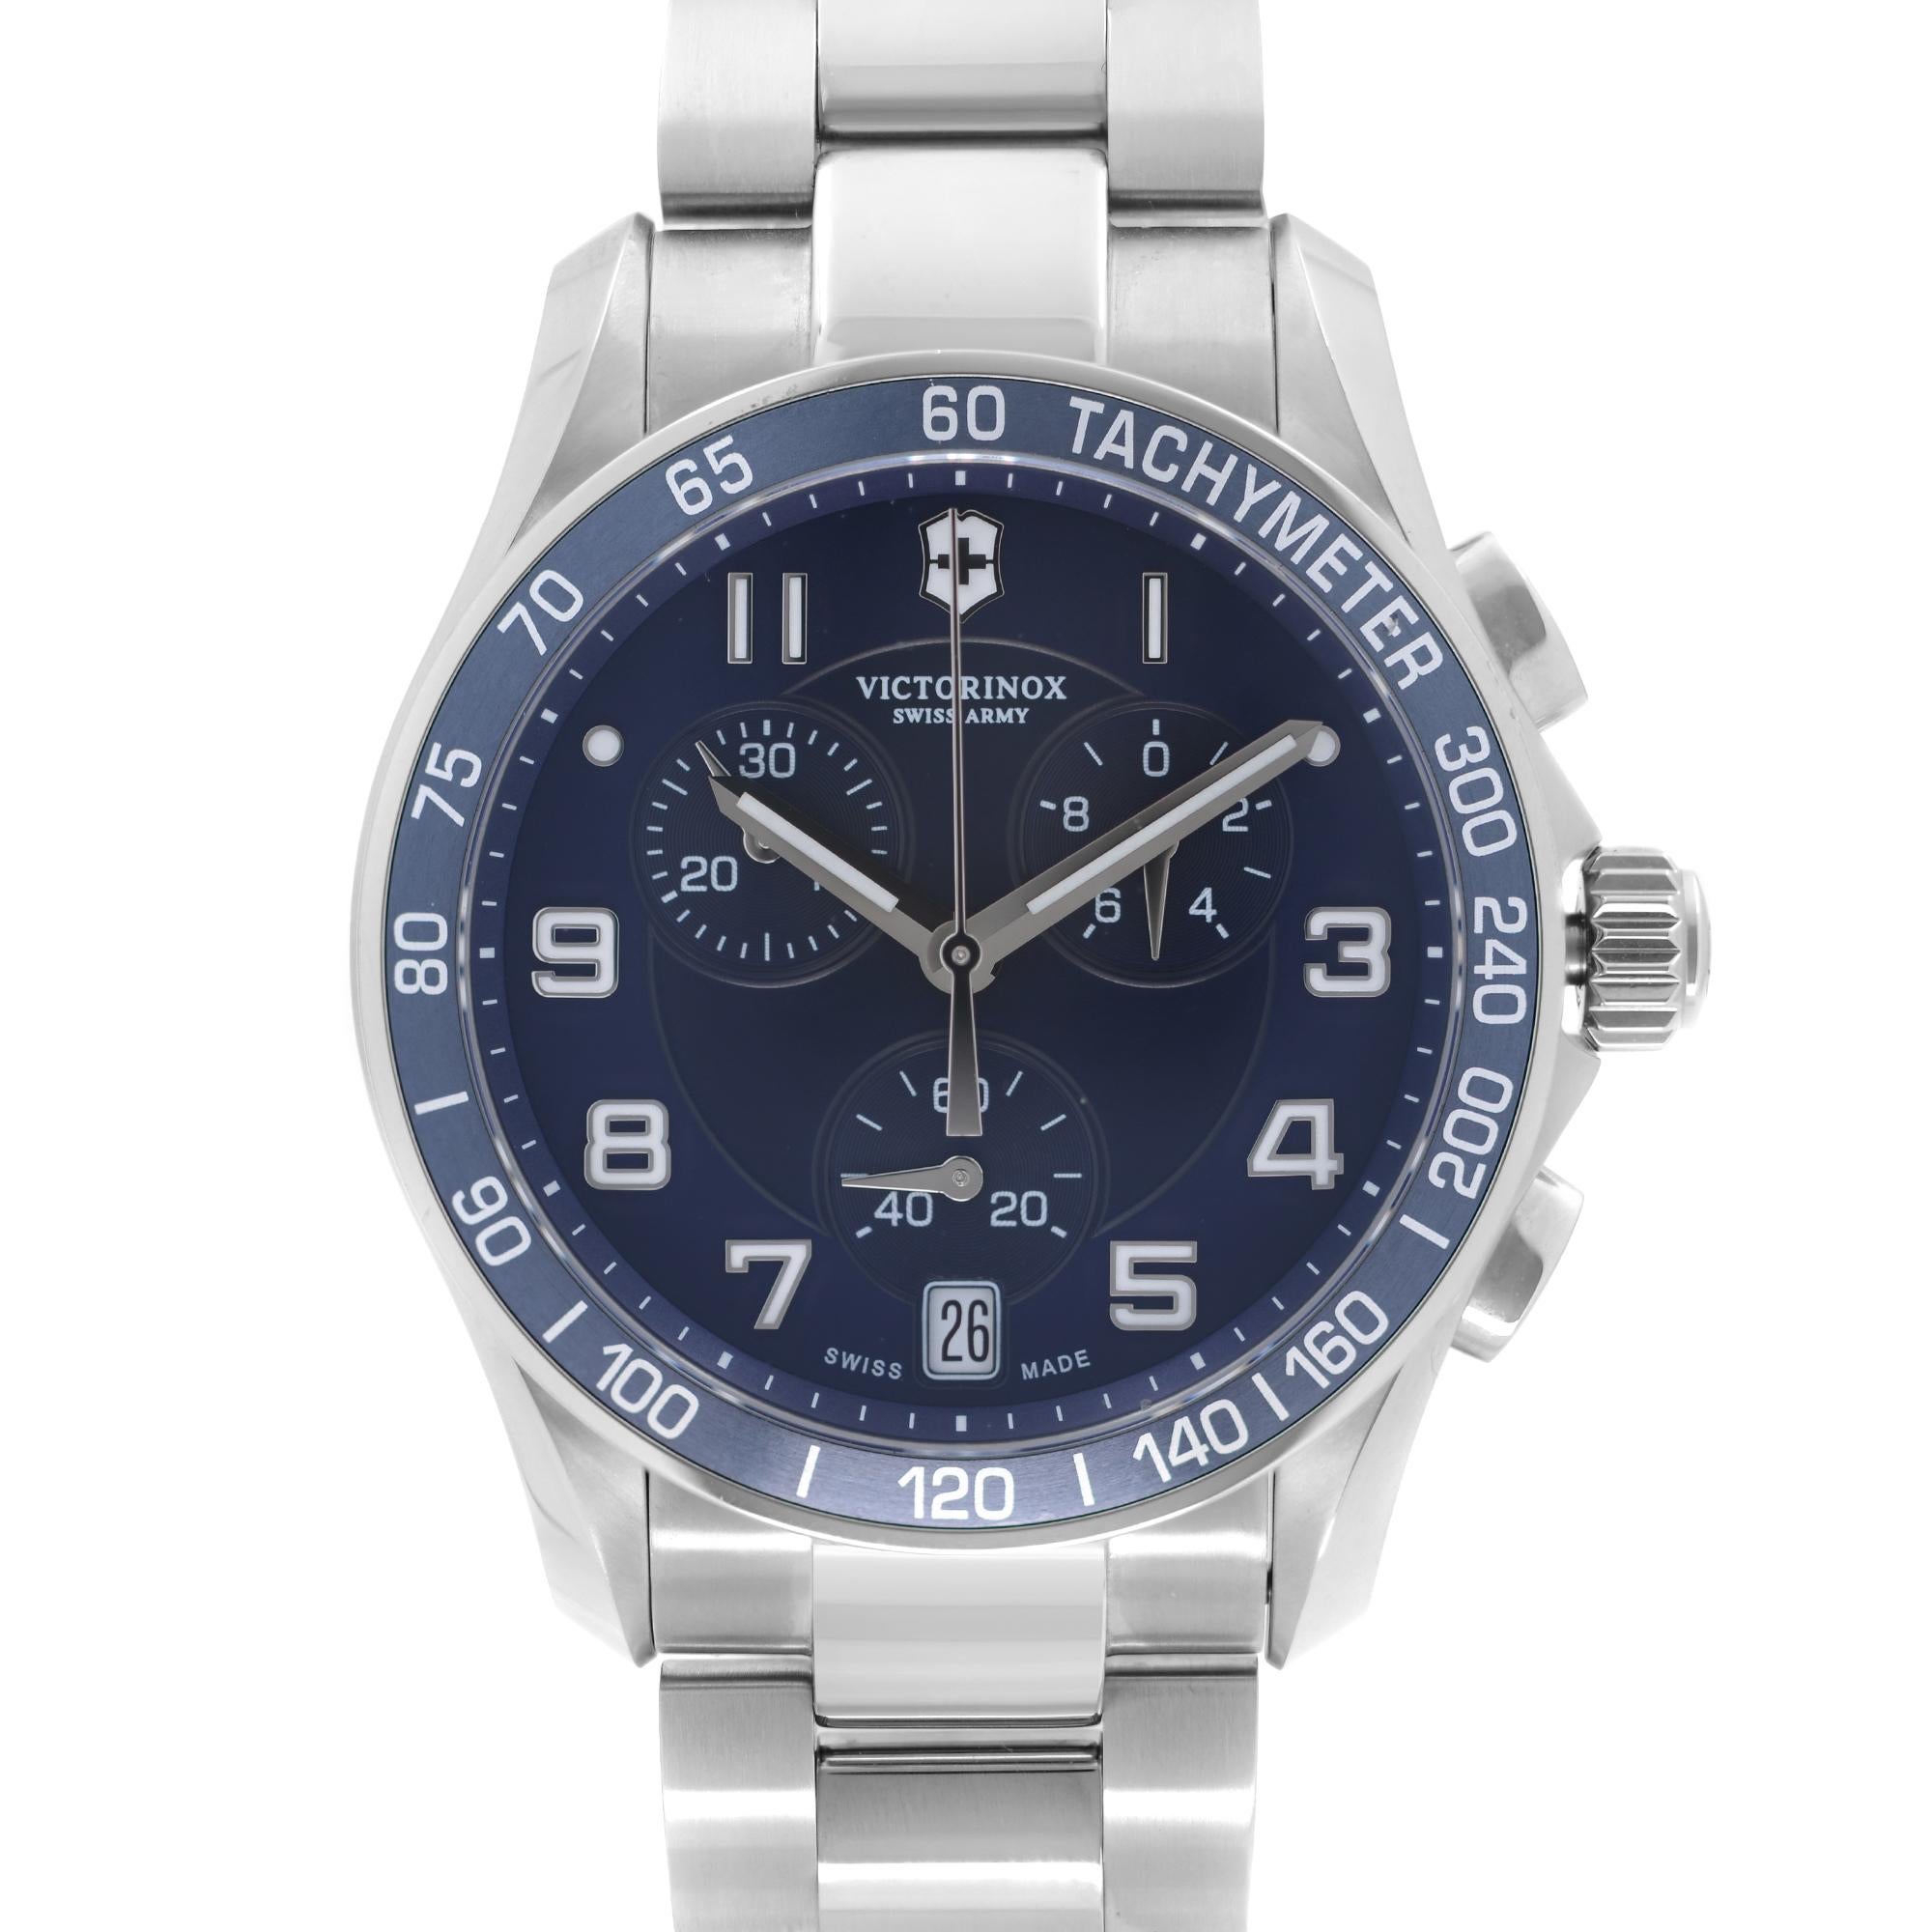 New with Defects Victorinox Chrono Classic Stainless Steel 40 mm Blue Dial Men's Quartz Watch 241497. The watch has 2 tiny dents on the Bezel due to storage and handling as a display model. This Beautiful Timepiece Features: A brushed Stainless